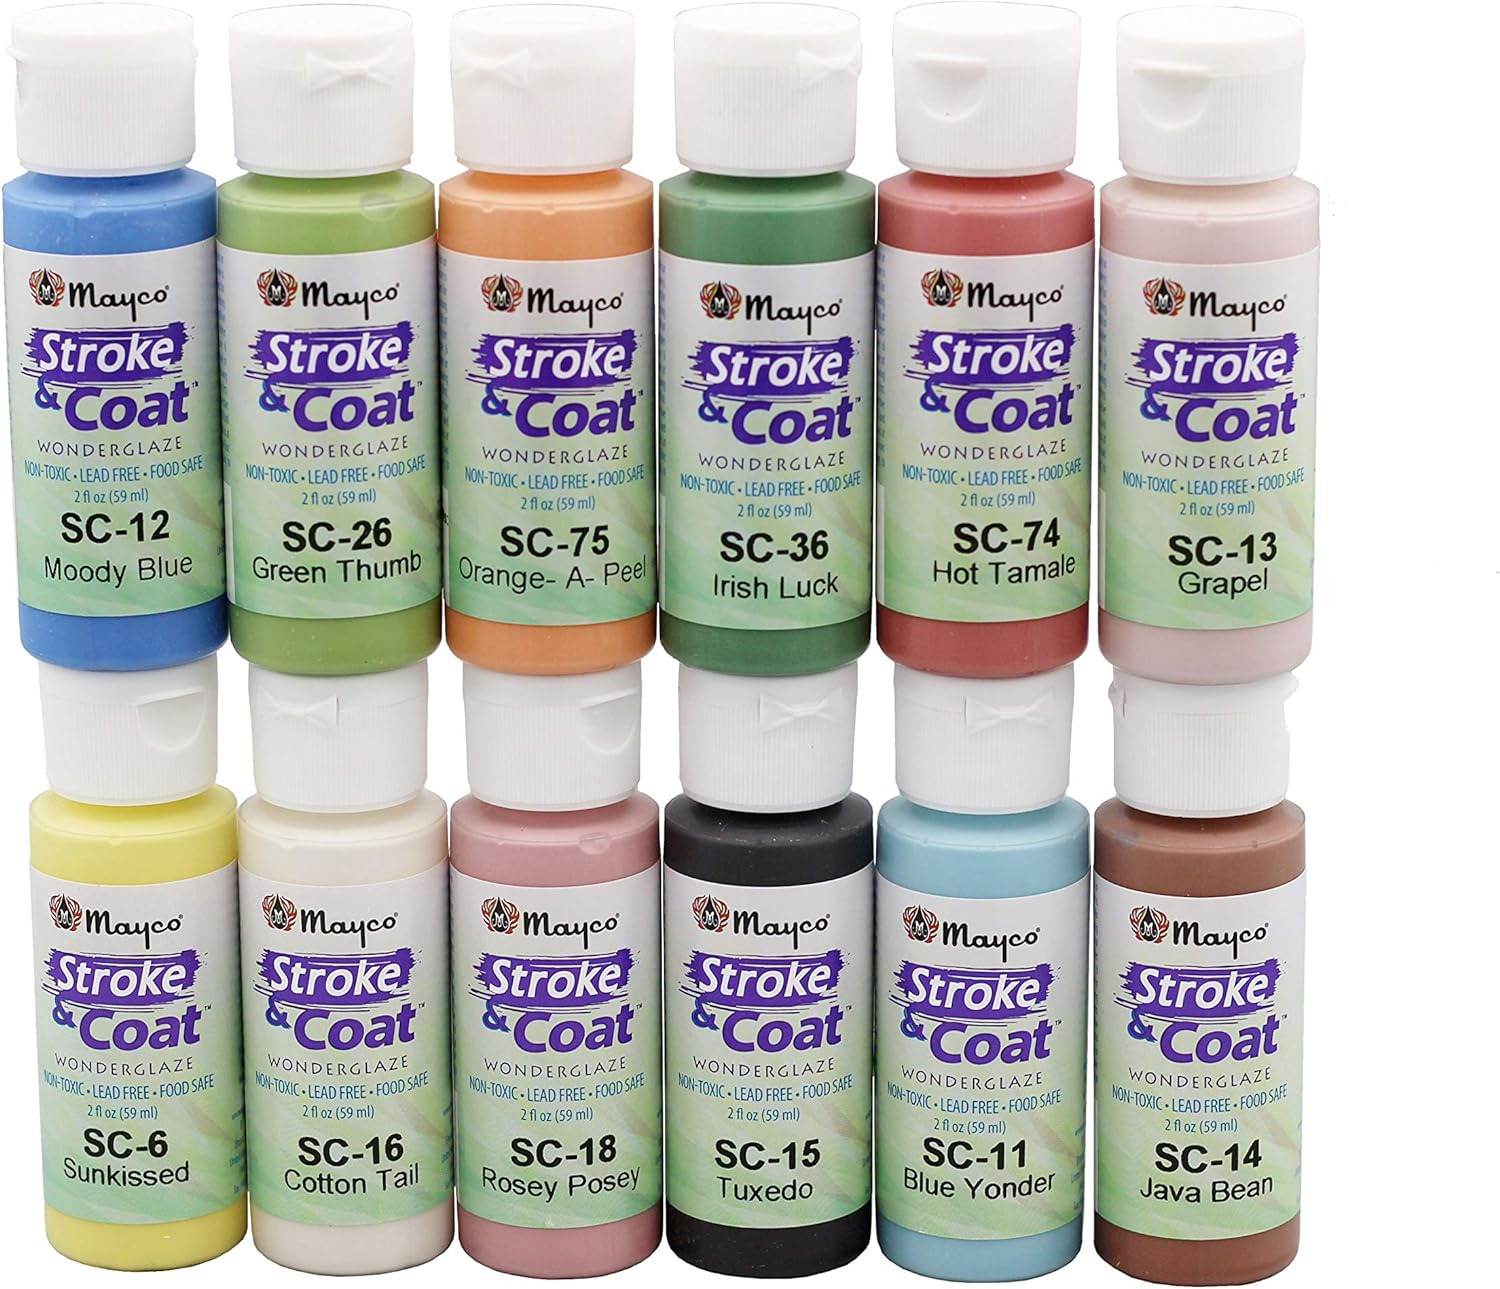 Mayco Stroke and Coat Glaze for Ceramics Kit 1 | 12 Assorted 2 Oz Jars with How 